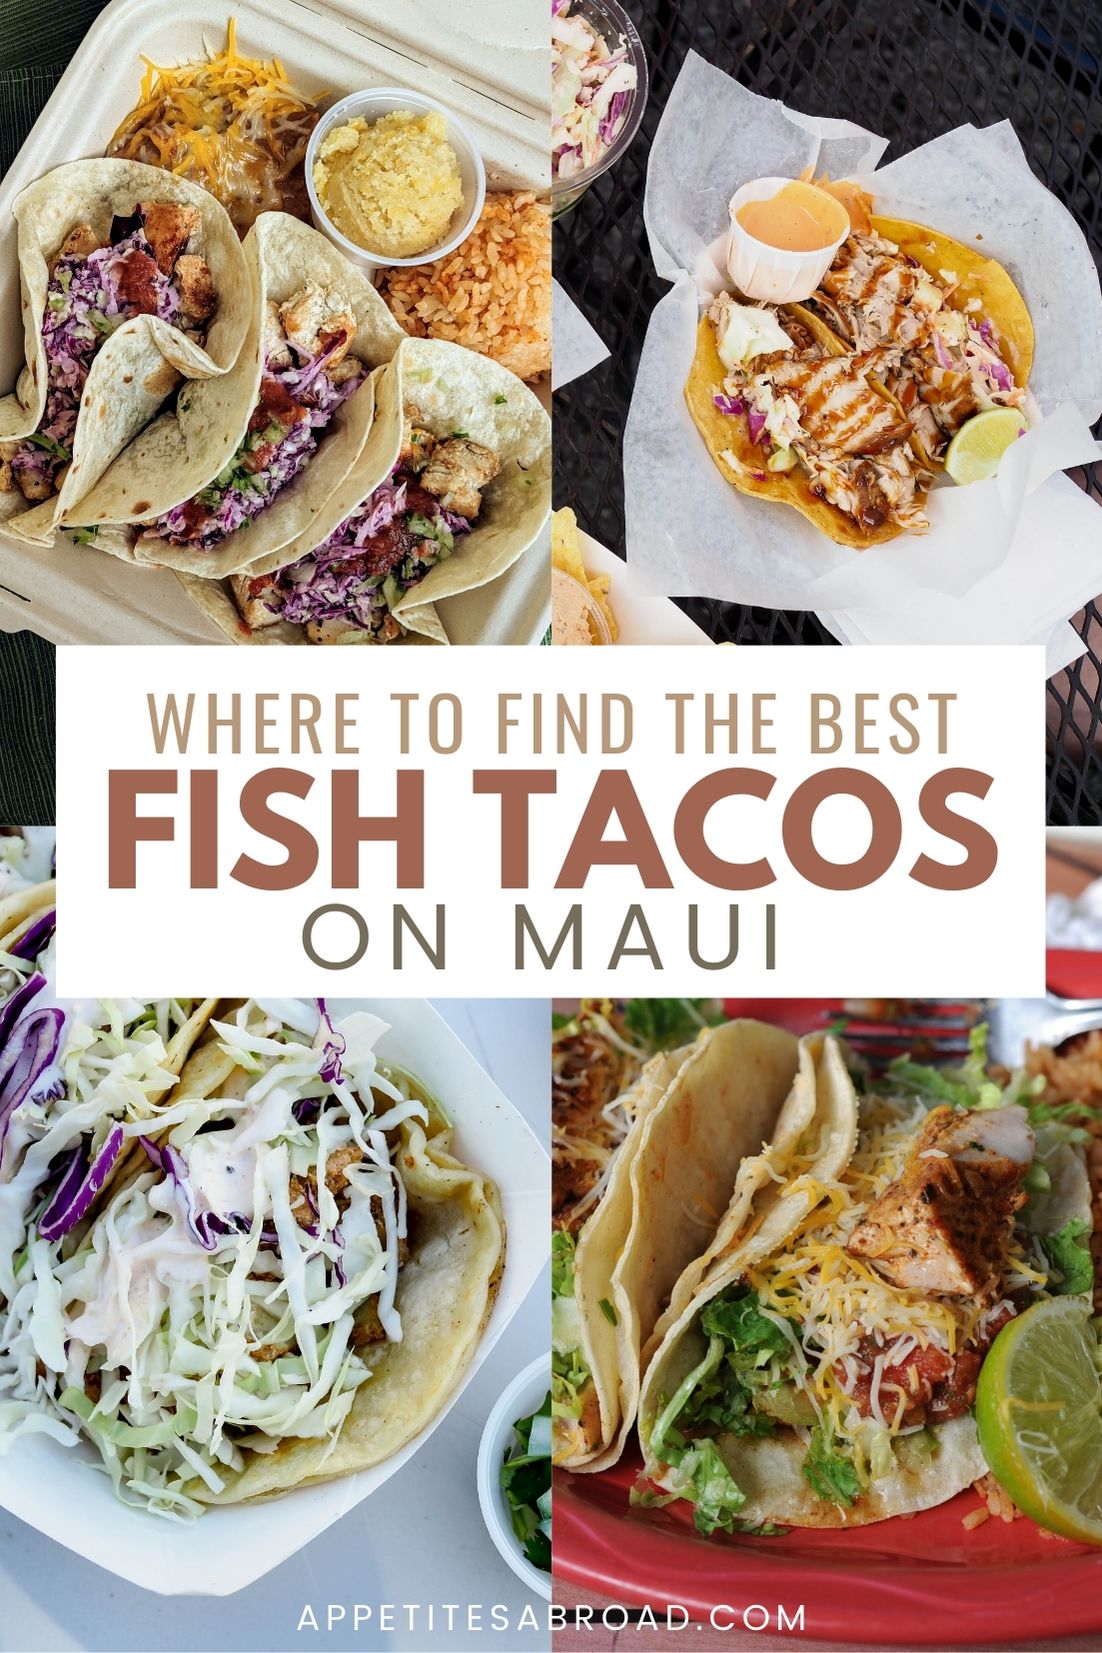 Where to Find the Best Fish Tacos on Maui - Appetites Abroad